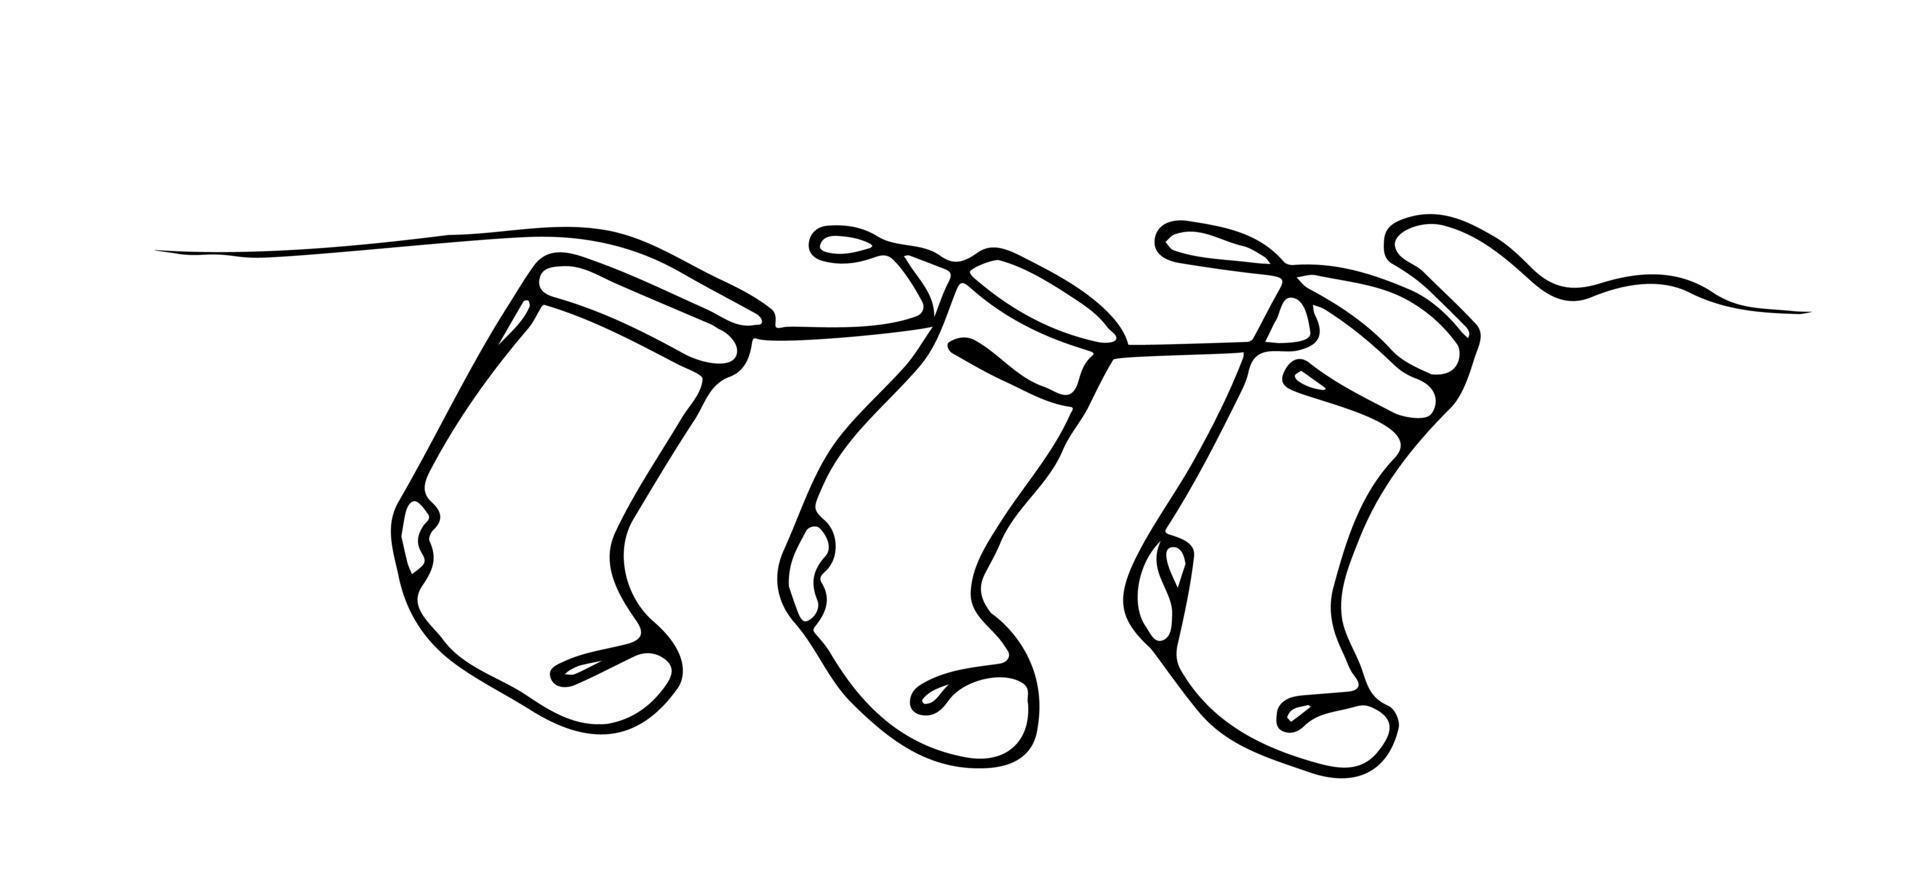 Line art Christmas stockings on the white backgraund. Coloring page ...